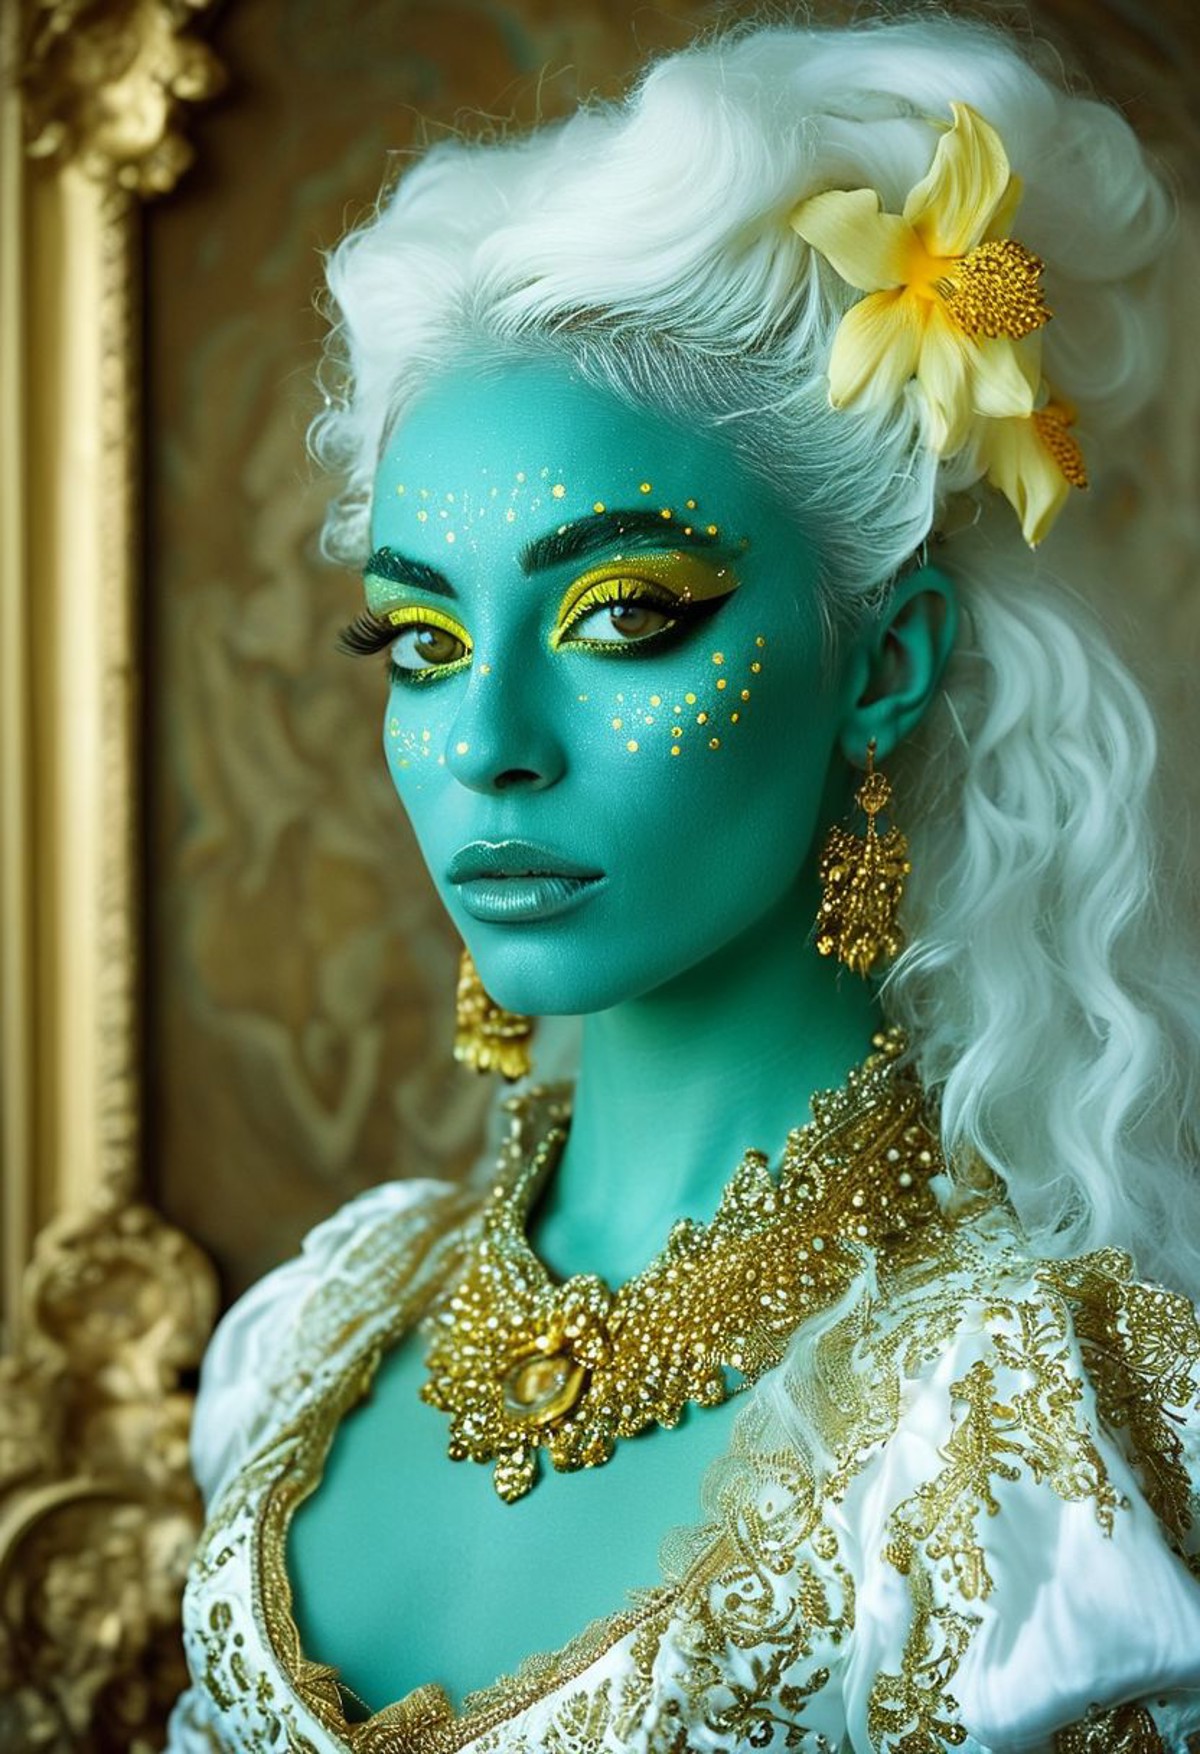 Persian Girl,photo of a 25-year-old half-alien and half-human woman with teal-coloured skin and with golden freckles and w...